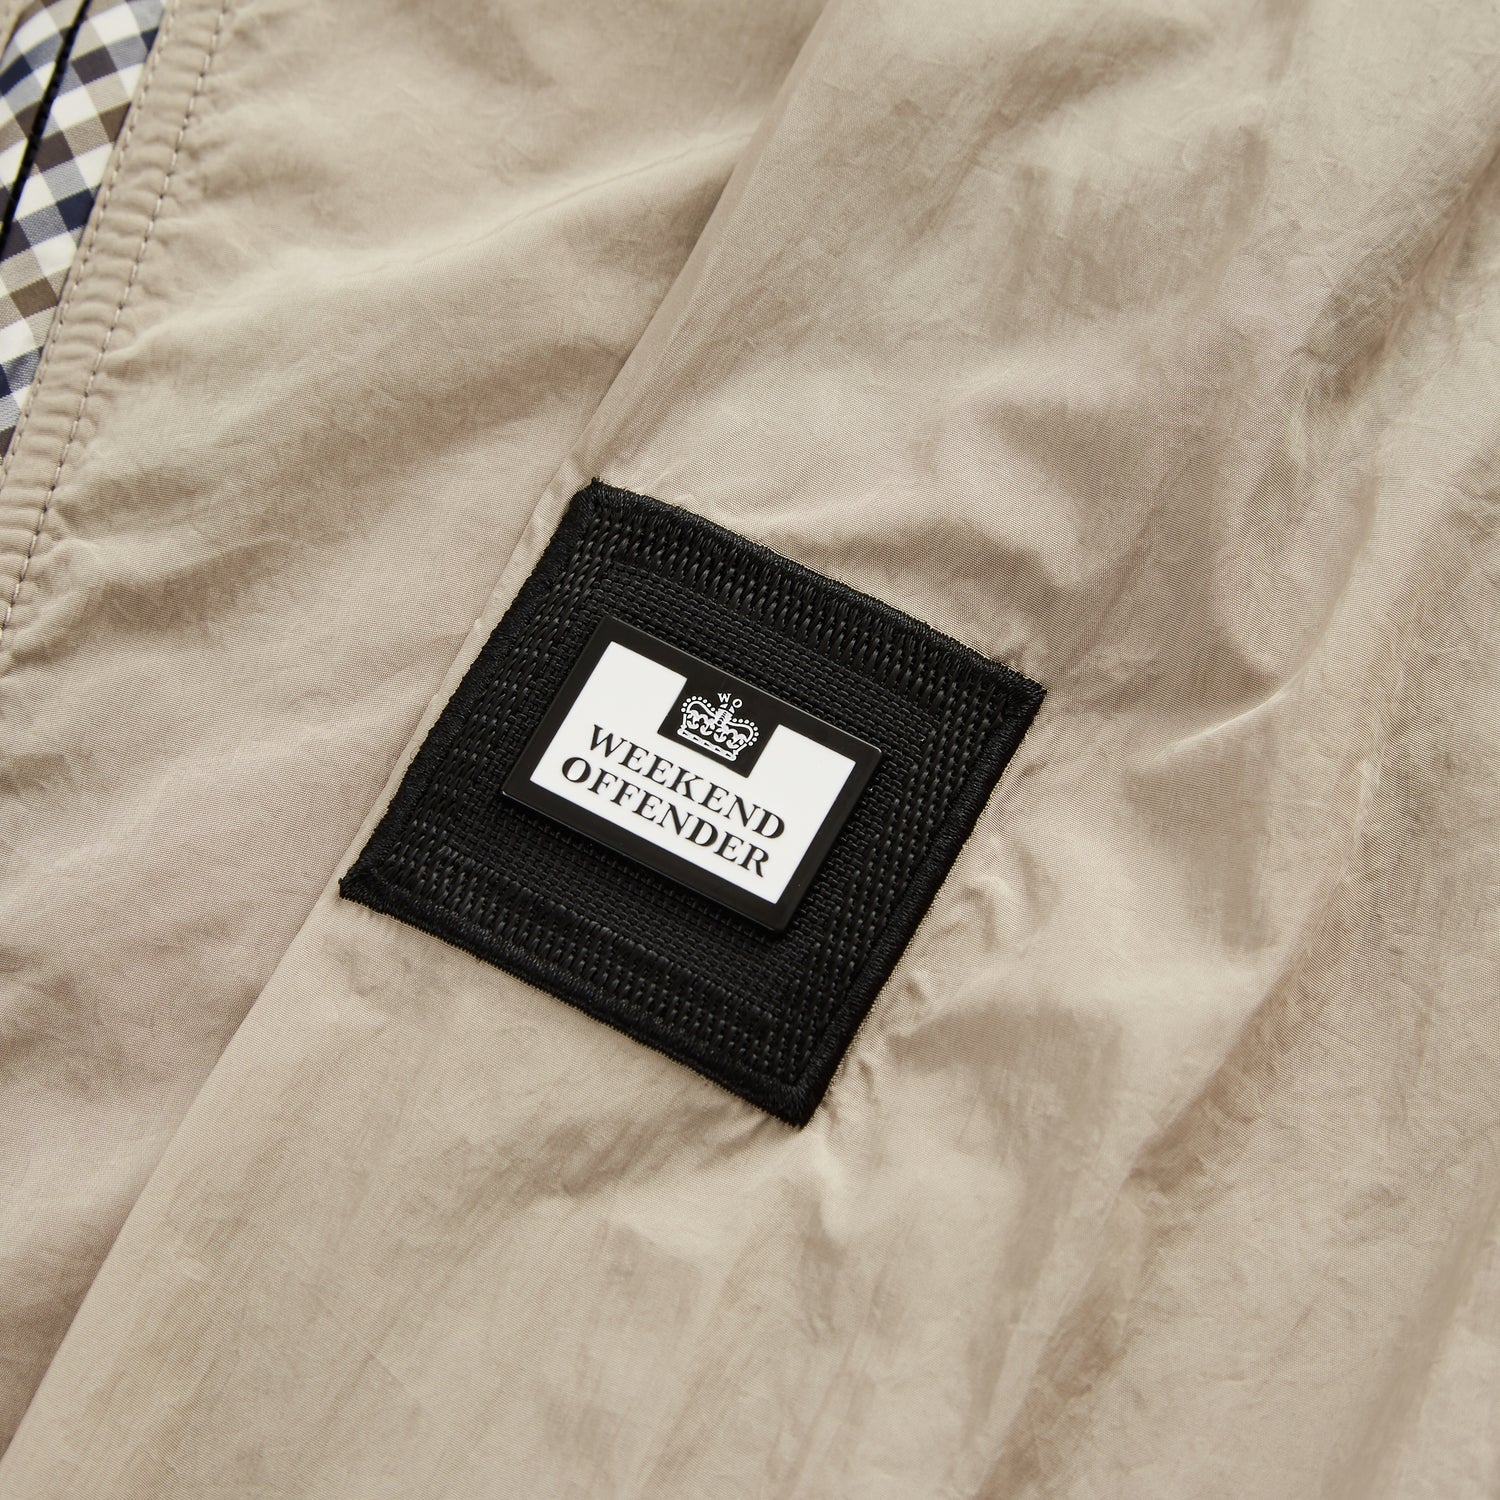 Weekend Offender Covington Light-weight Over-Top Jacket - Porcino